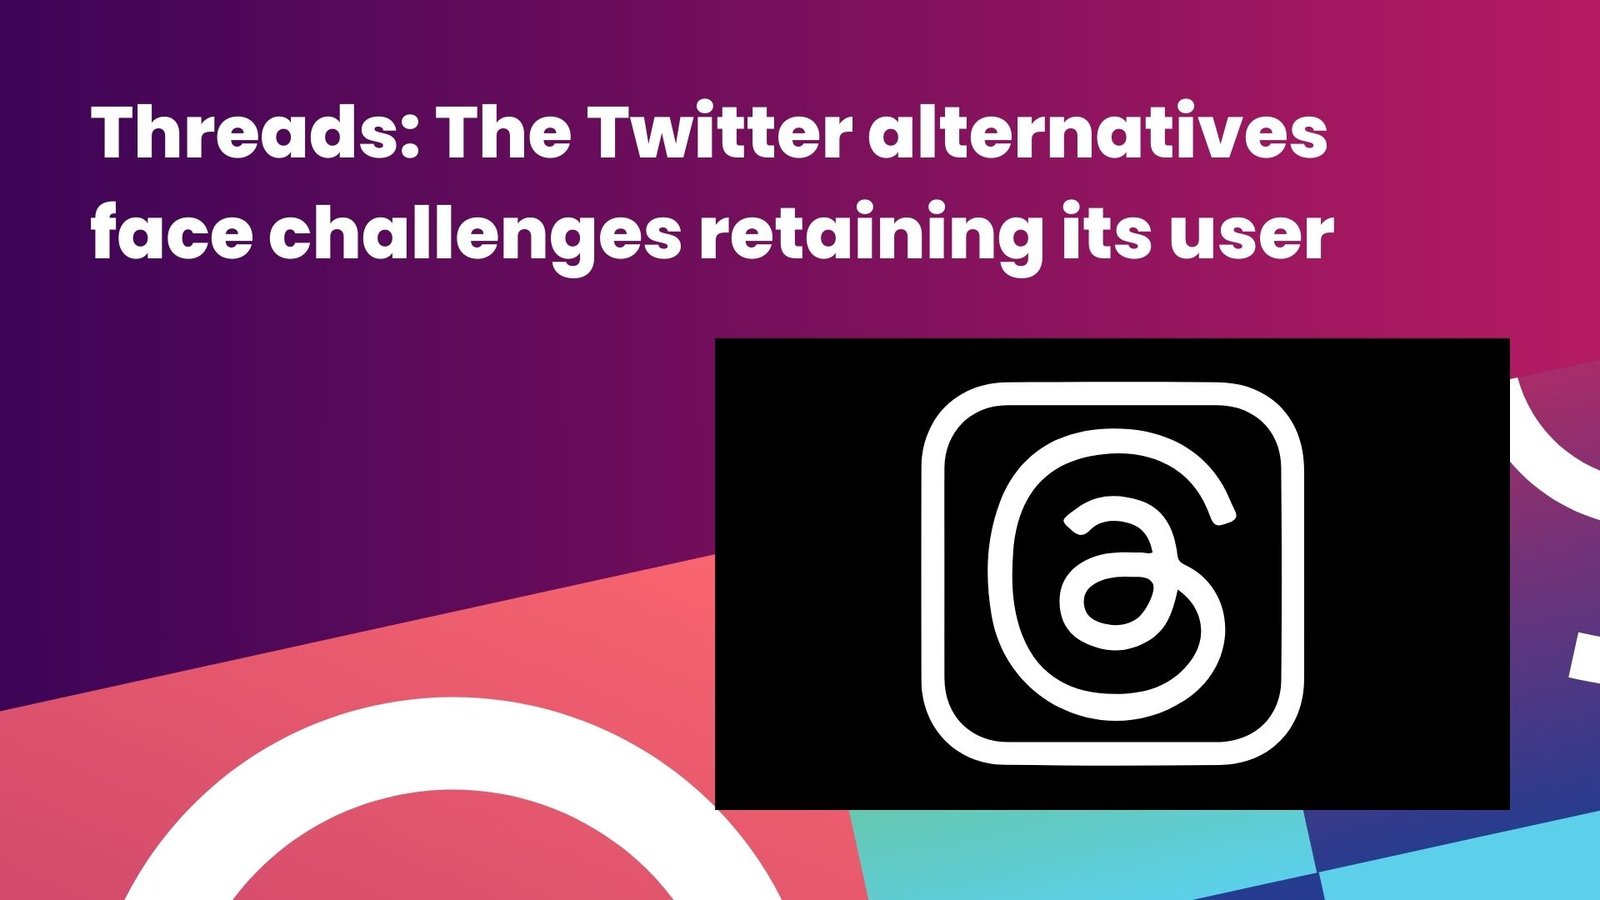 Threads: The Twitter Alternative faces challenges retaining its user